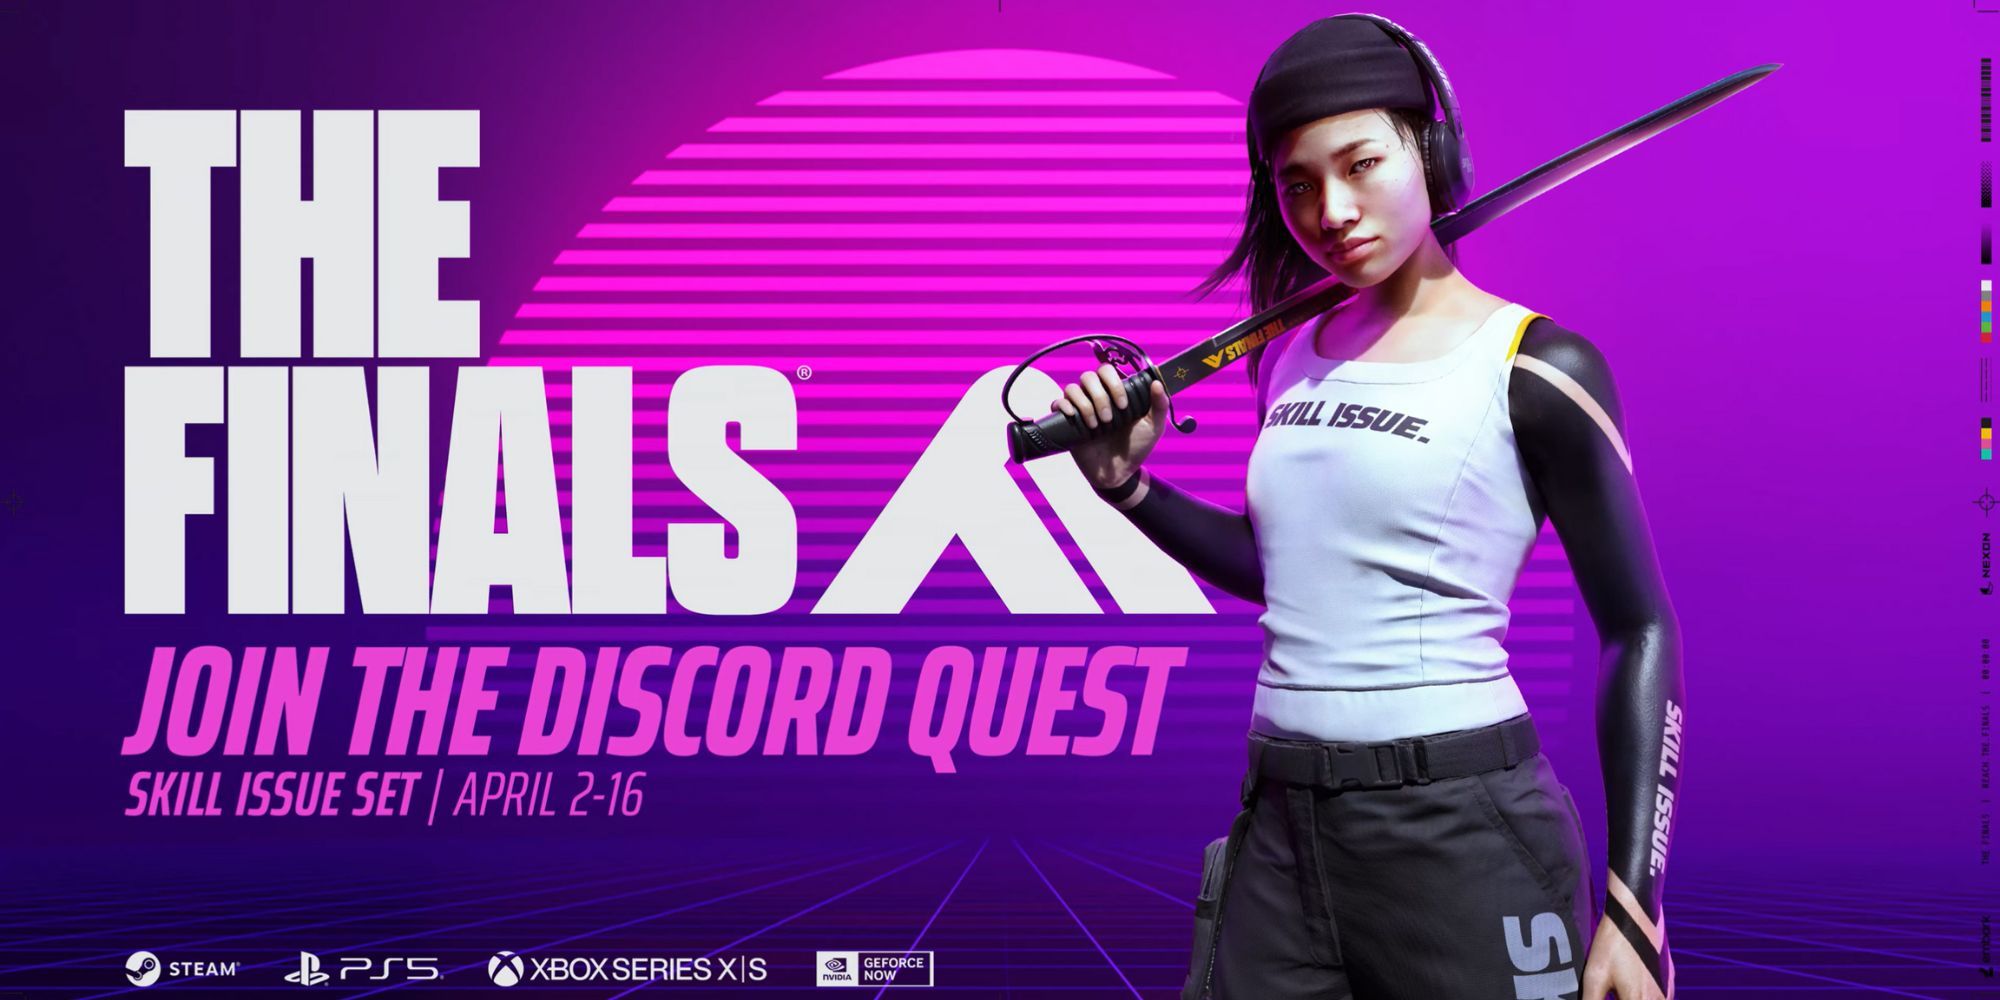 Skill Issue bundle via The Finals redeem code in Discord Quest 